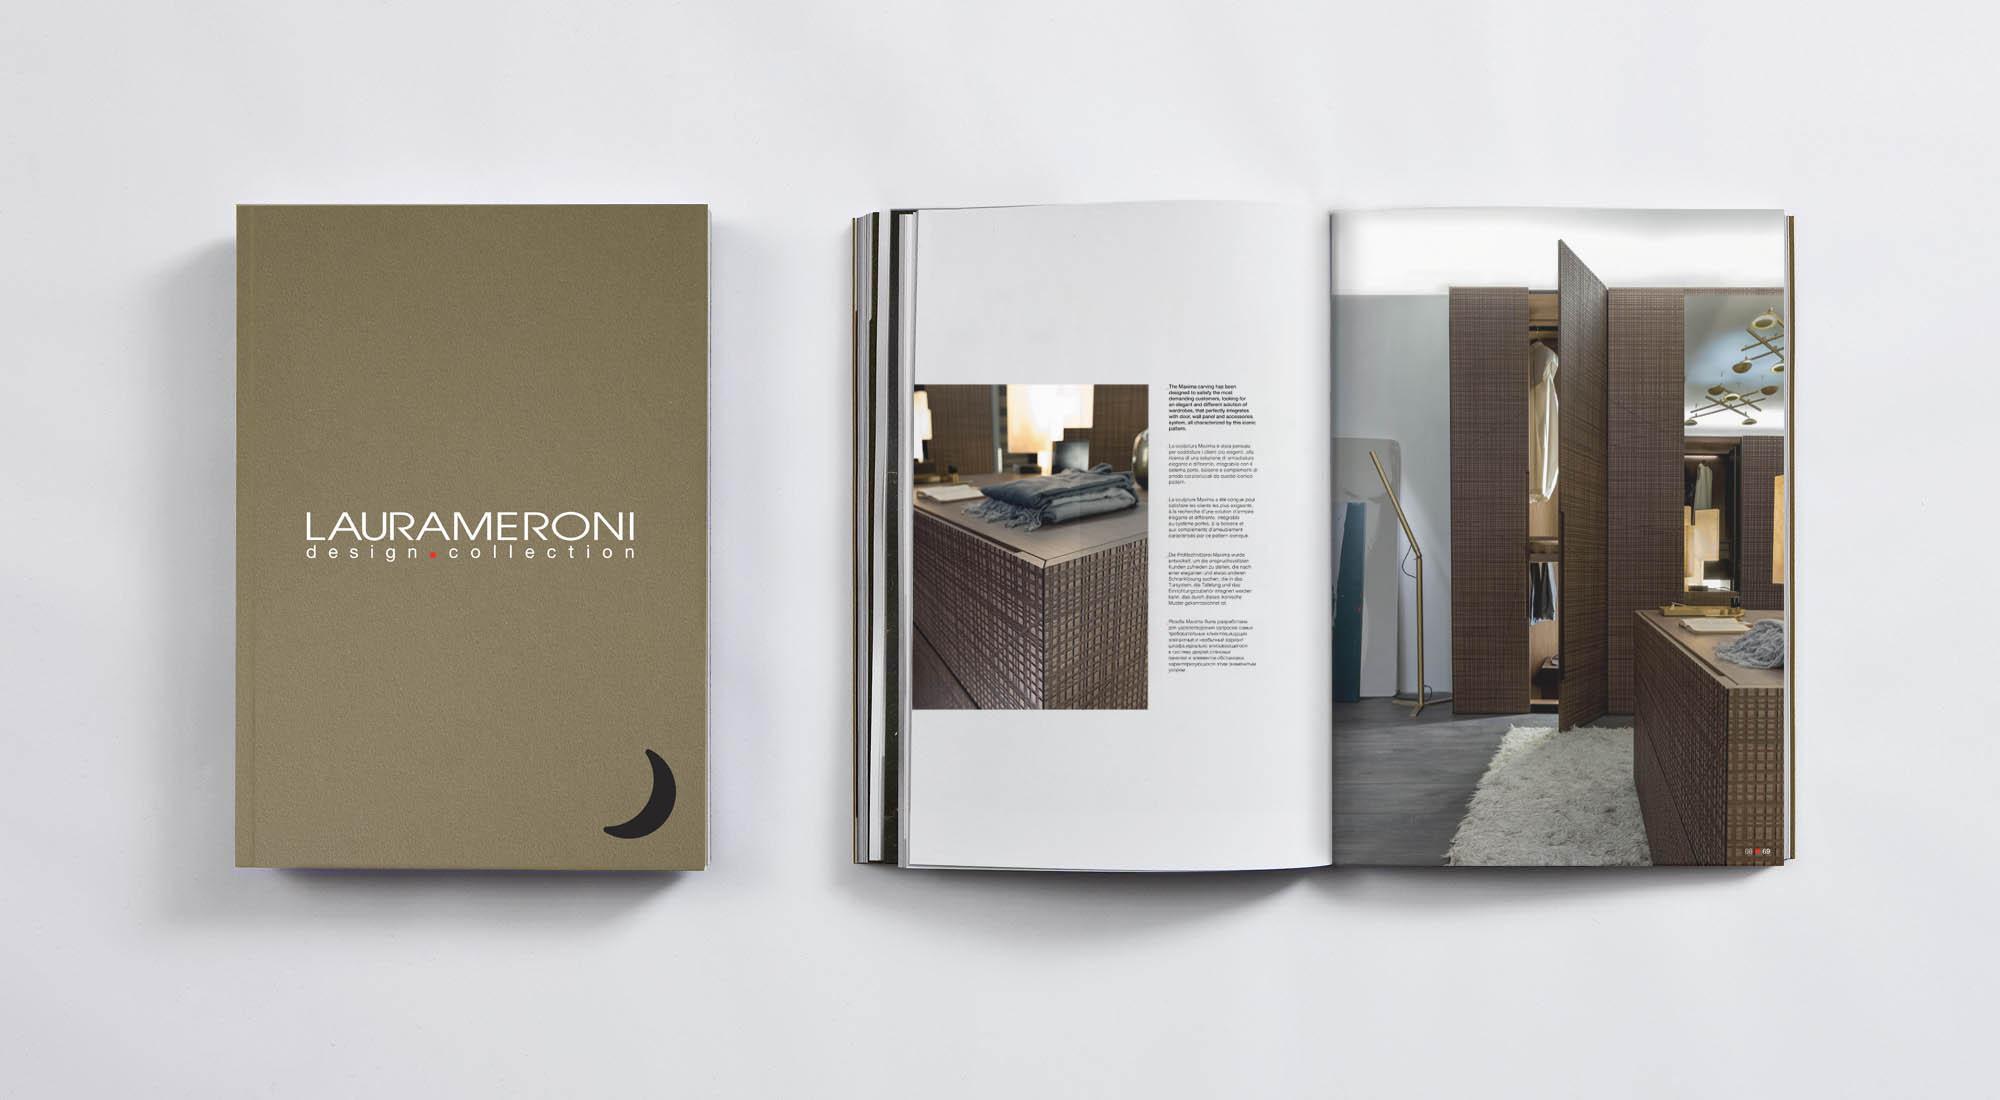 laurameroni design collection luxury bedroom furniture catalogue free download